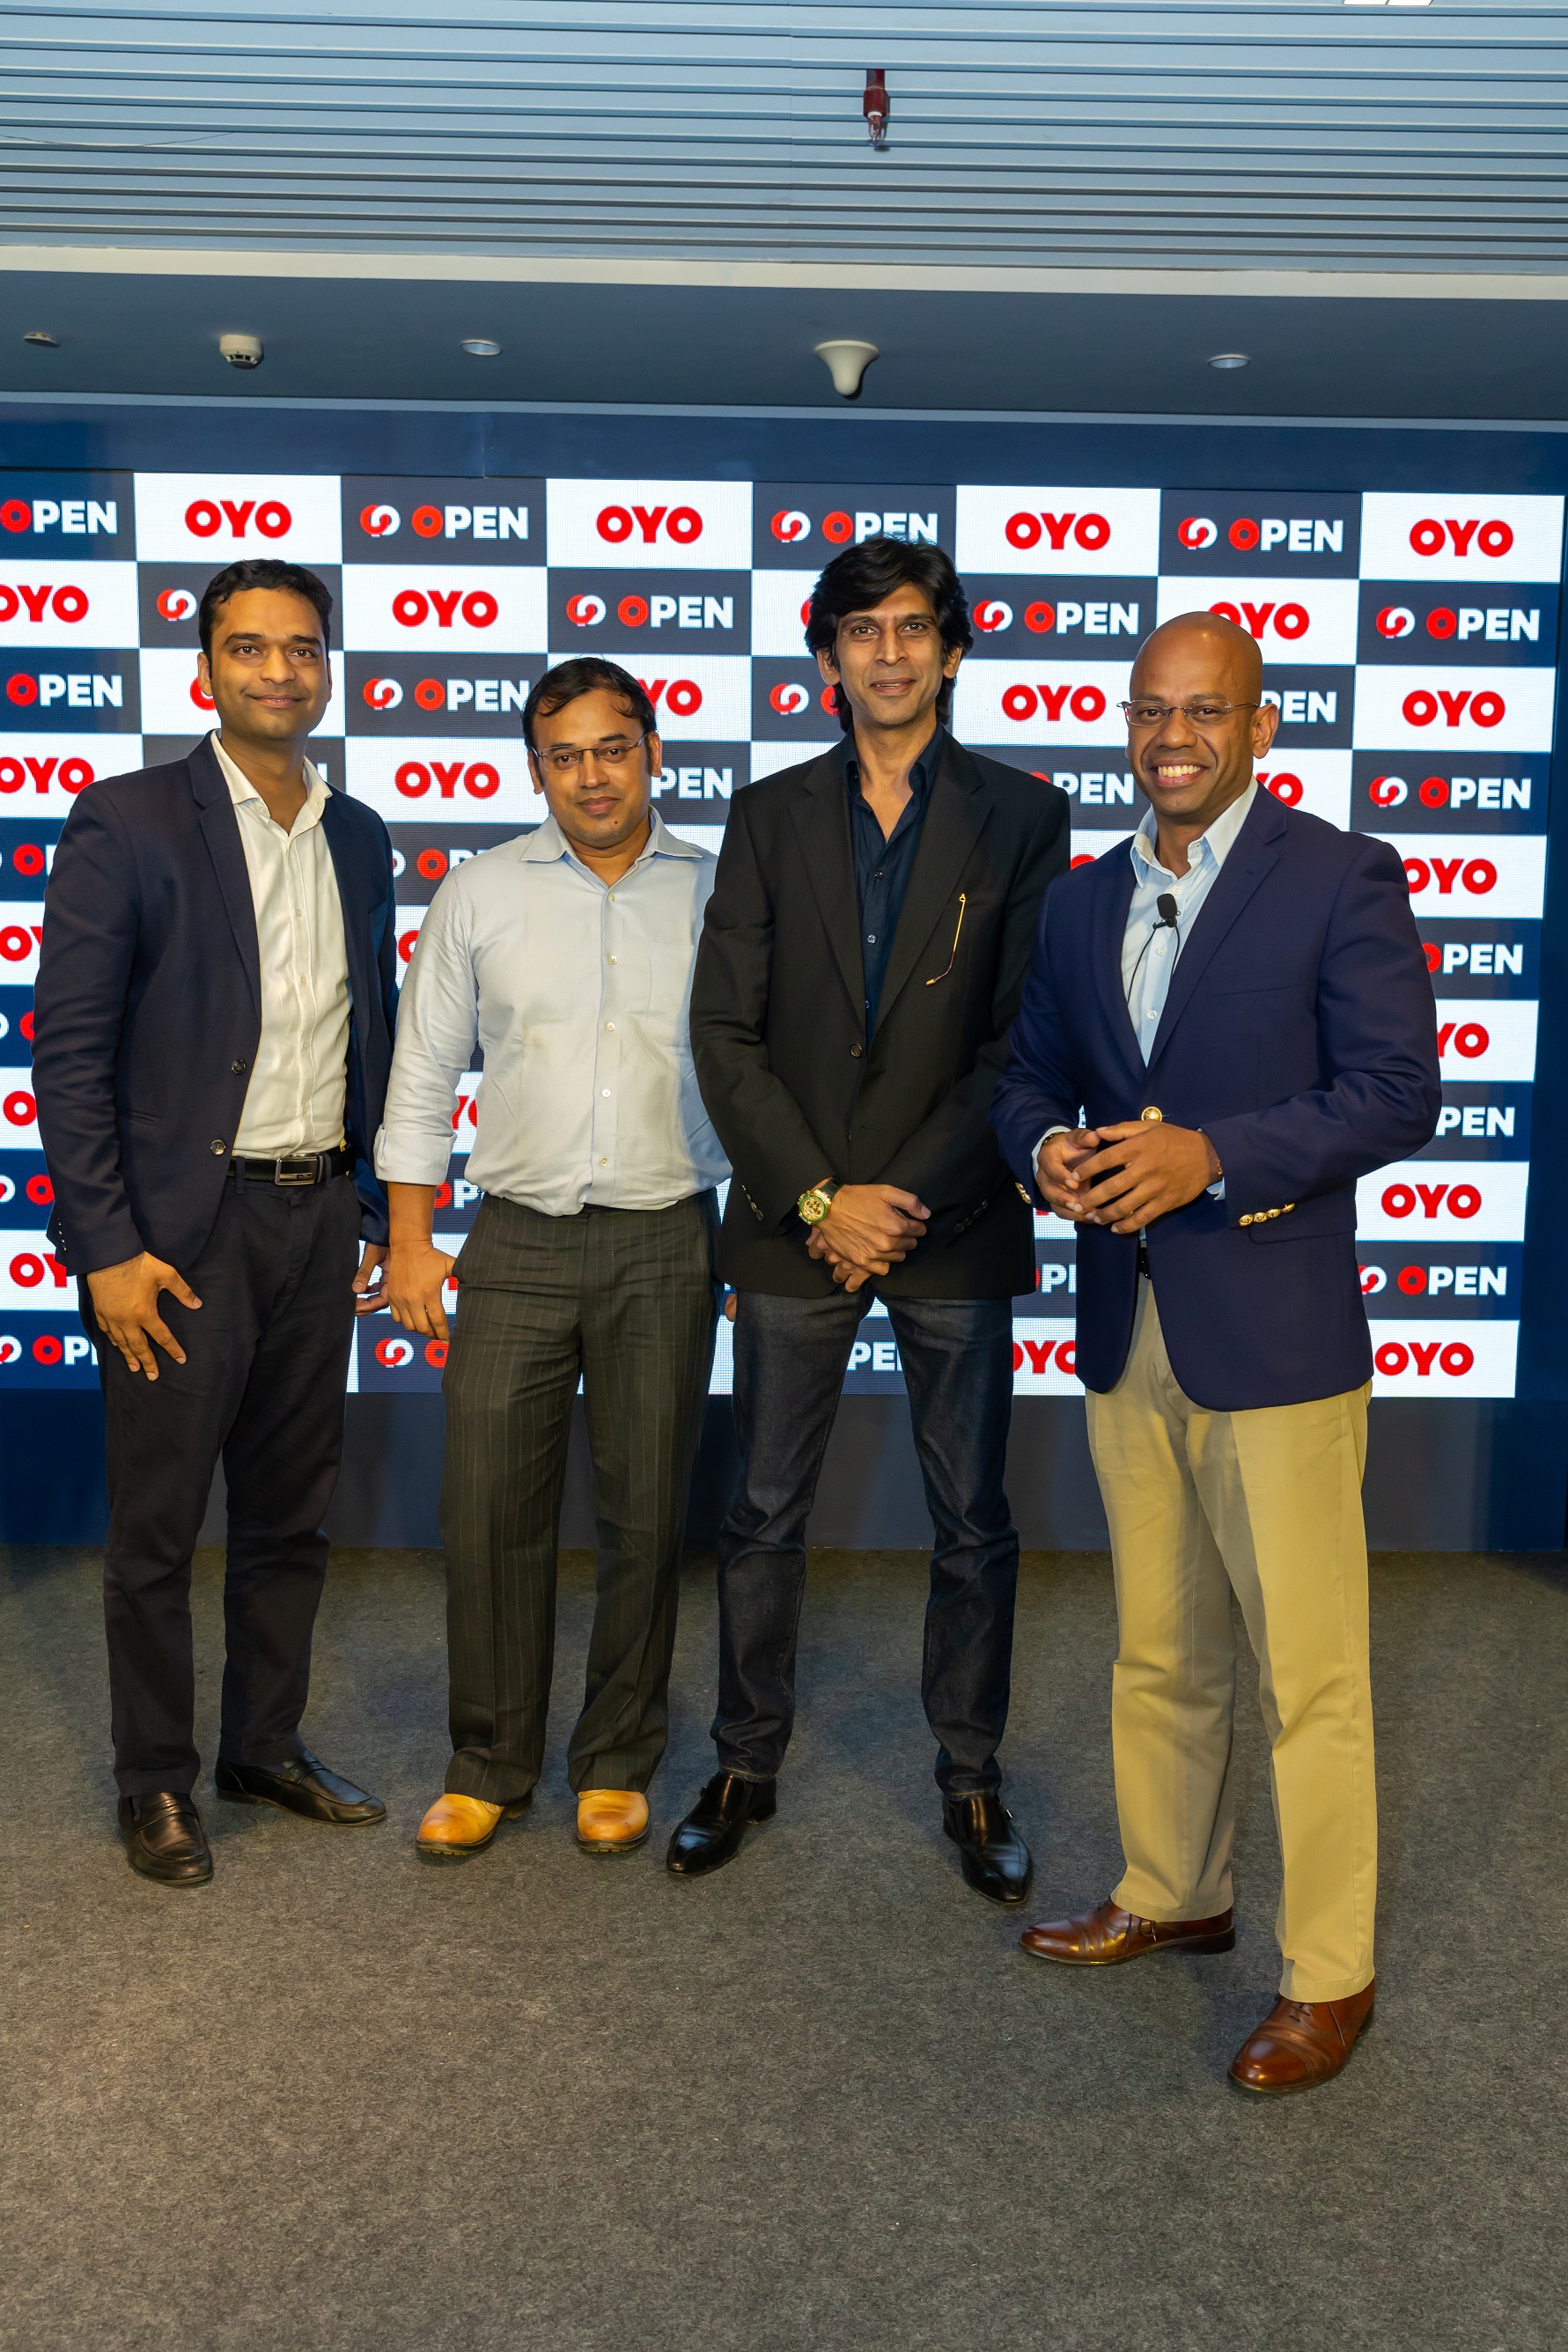 L to R - Mr Ayush Mathur, Chief Supply Officer at OYO Hotels & Homes, M...